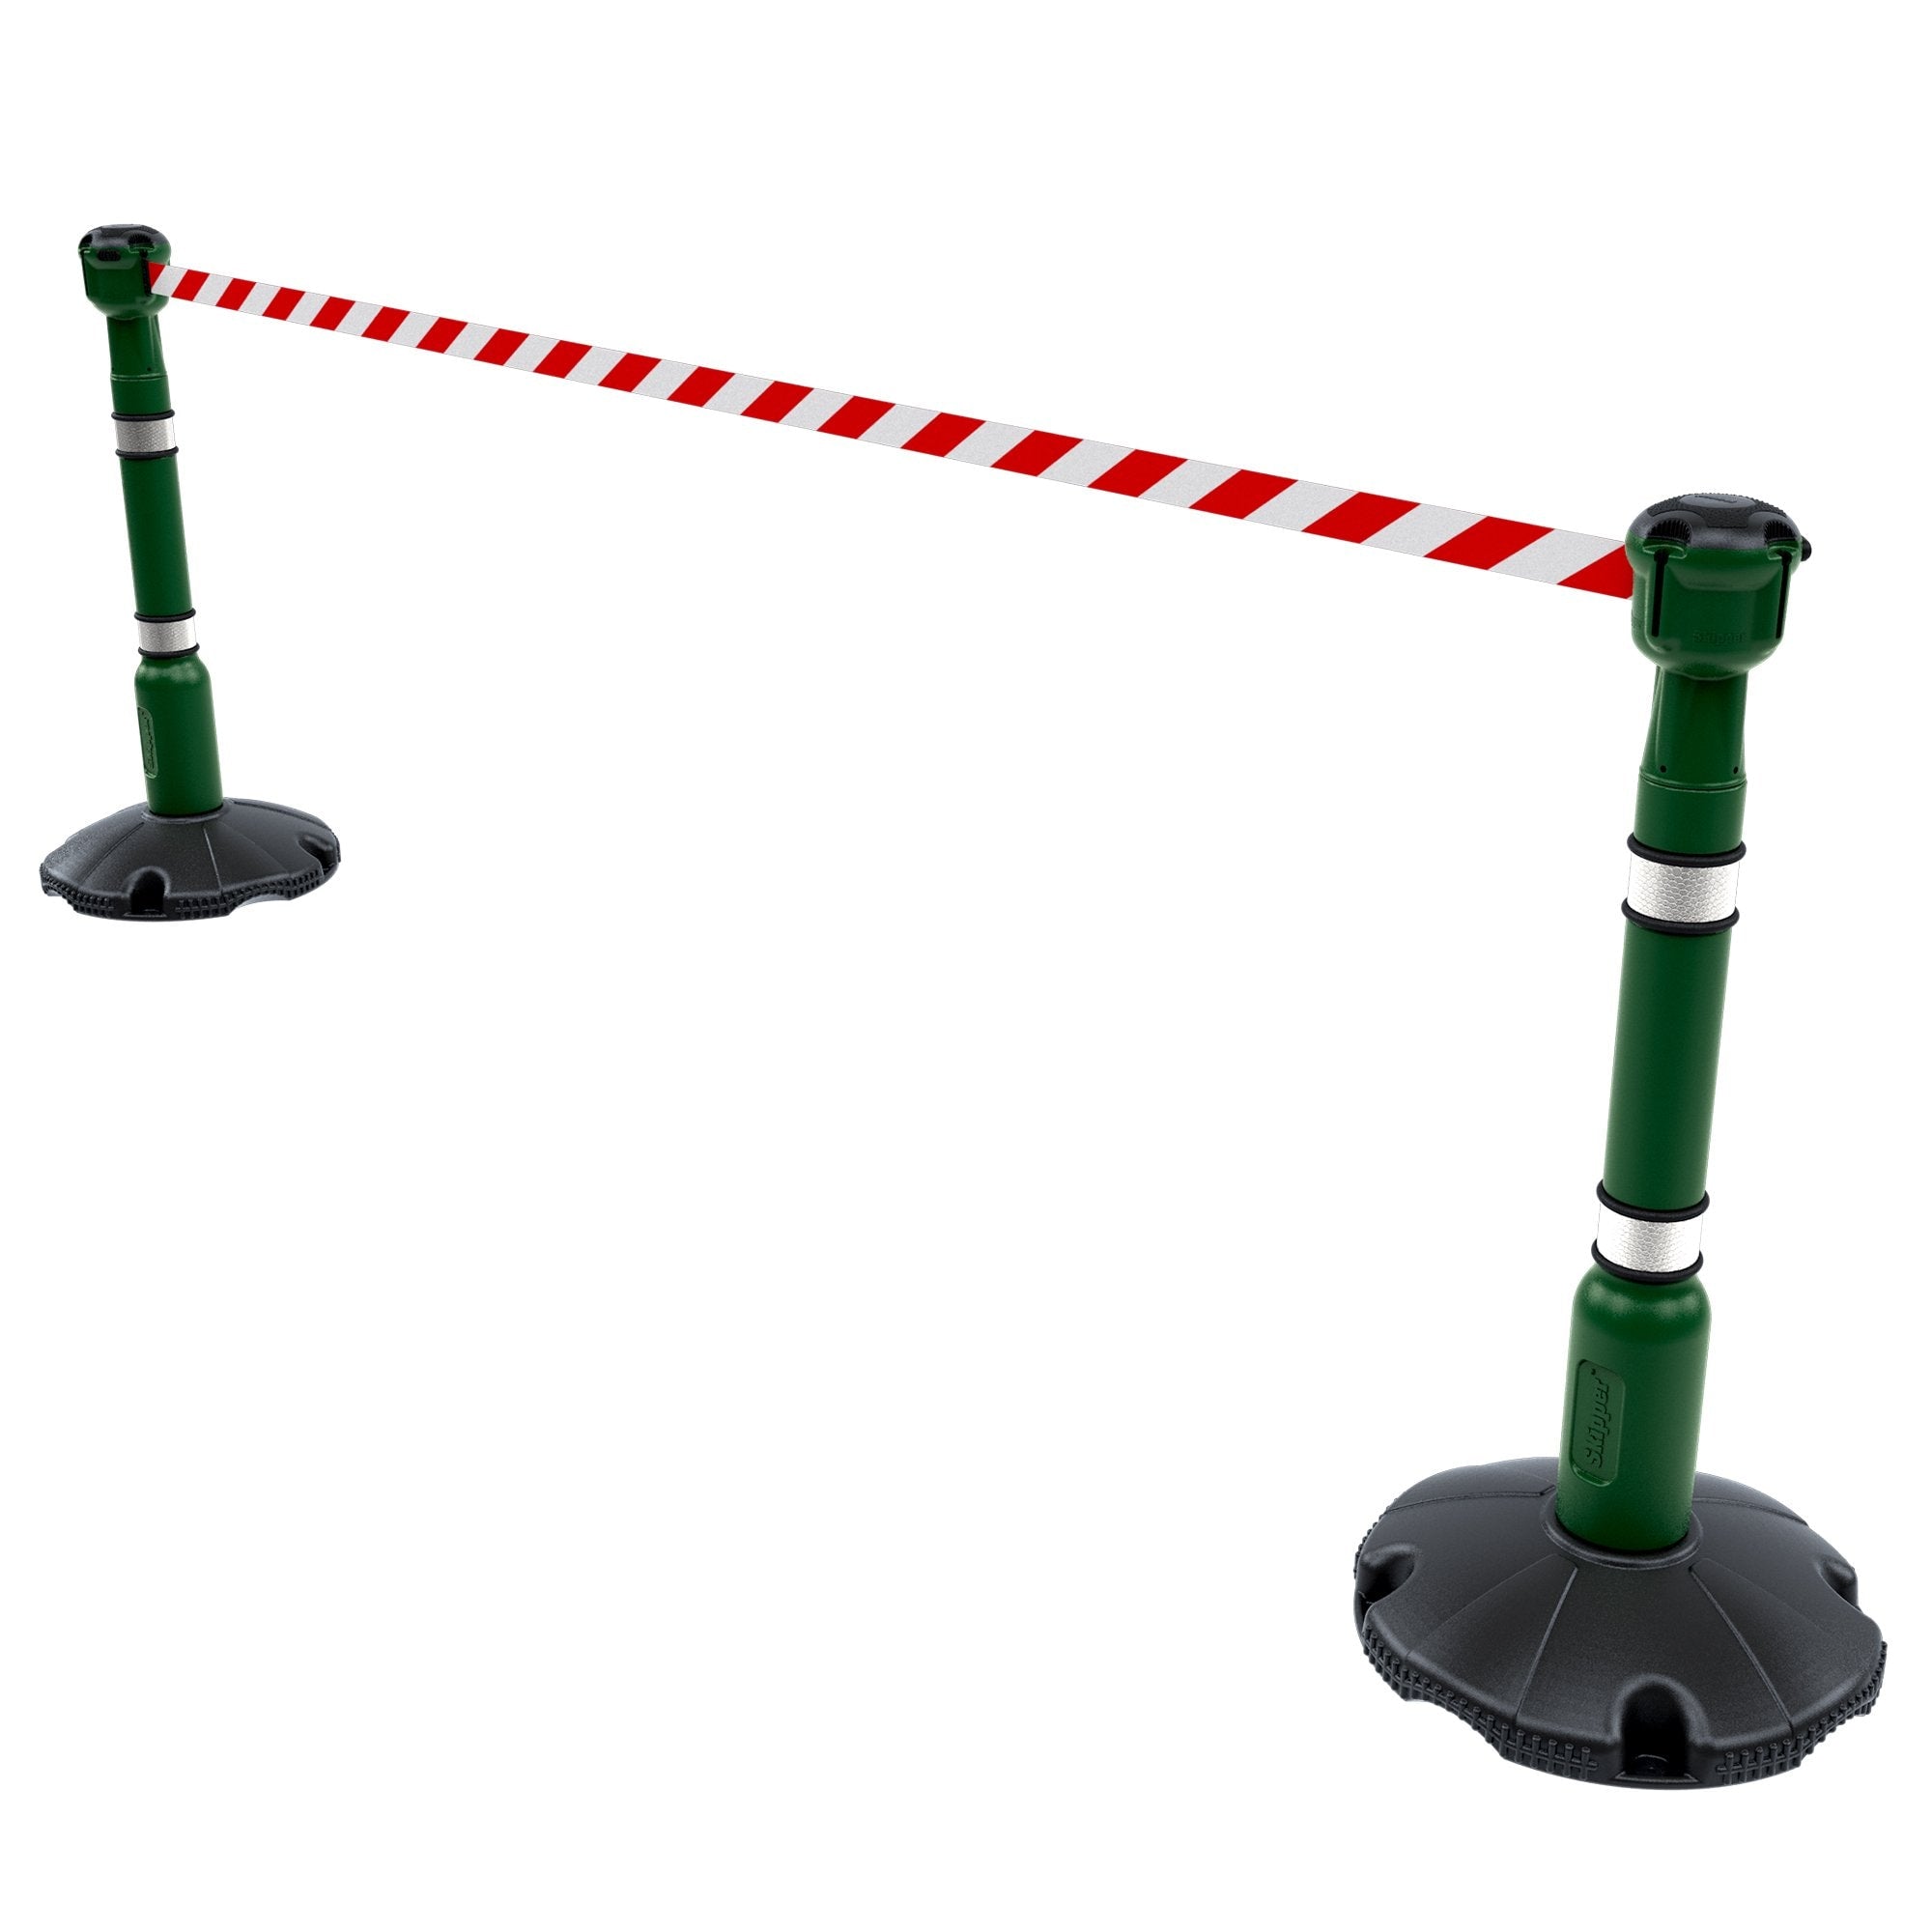 Skipper 9m Retractable Safety Barrier Complete Kit - Kit10 Retractable > Crowd Barrier > Tensa > Skipper One Stop For Safety Green Red & White Chevron 